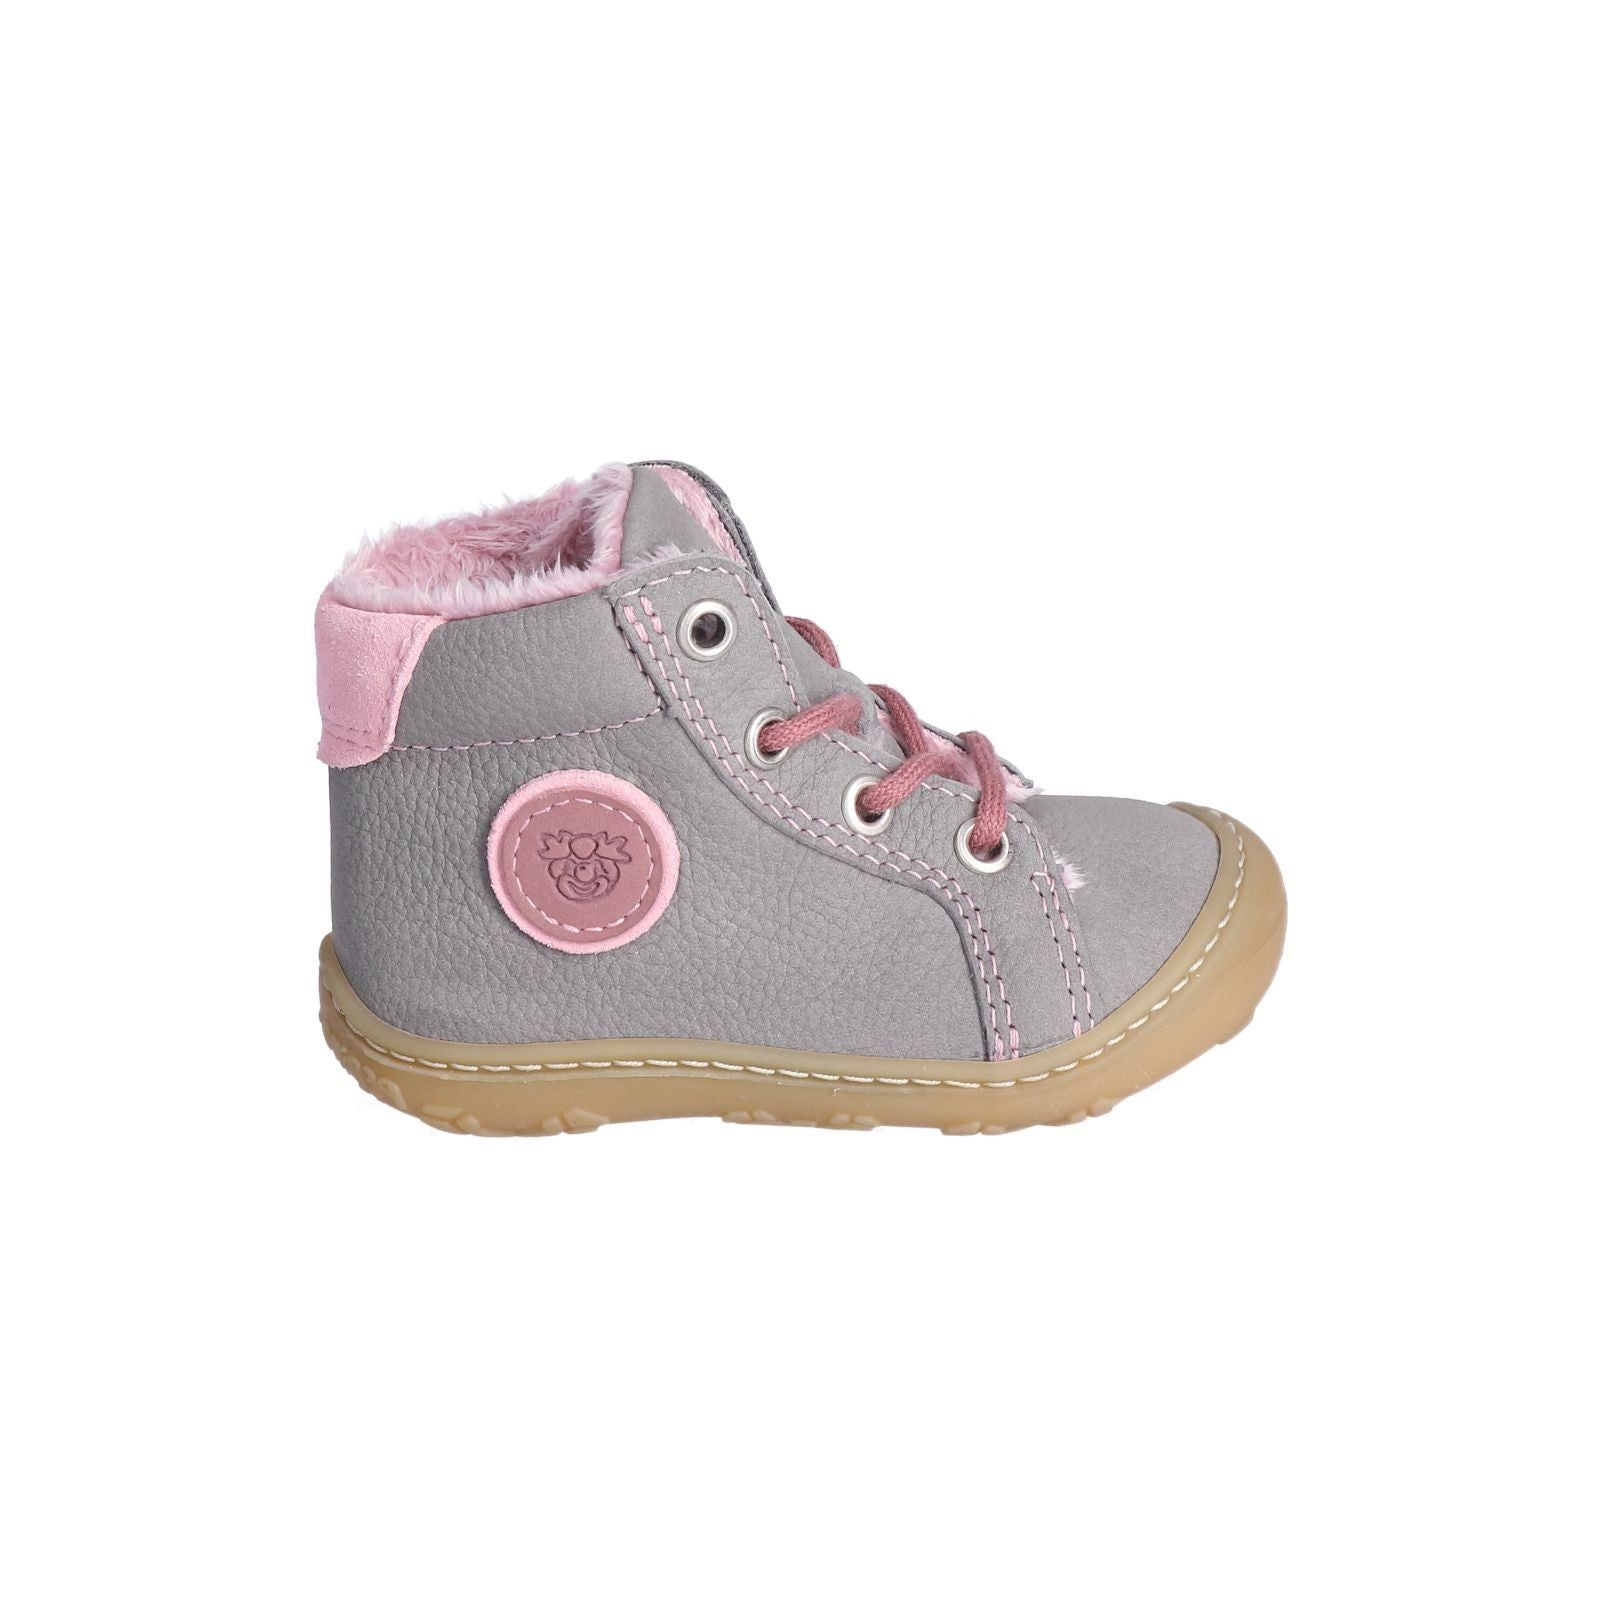 A girls ankle boot by Ricosta, style Georgie, in grey and pink leather with lace fastening. Right side view.